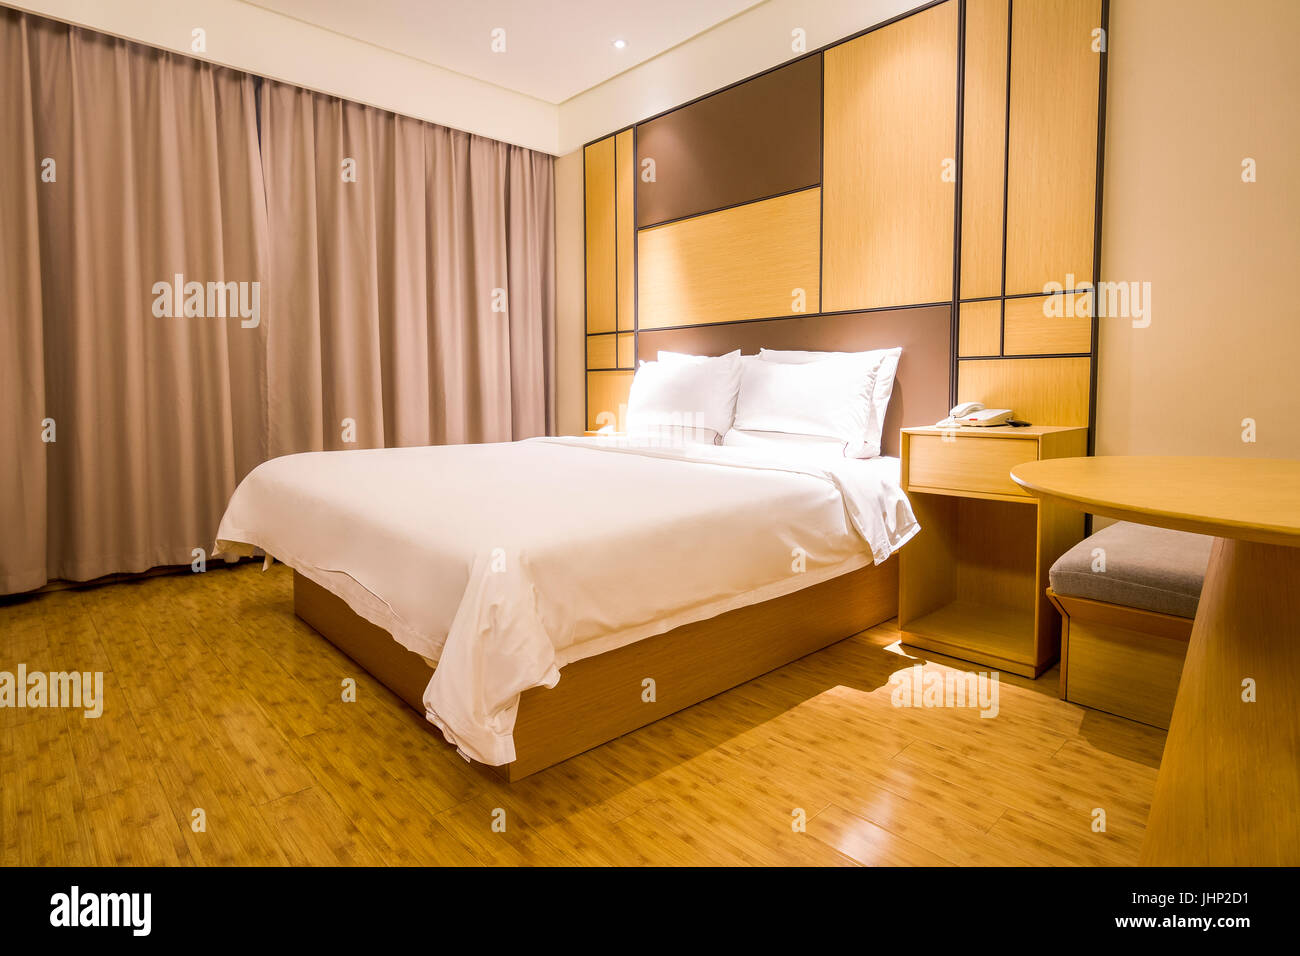 The Interial View of A Fancy Hotel Room. Stock Photo